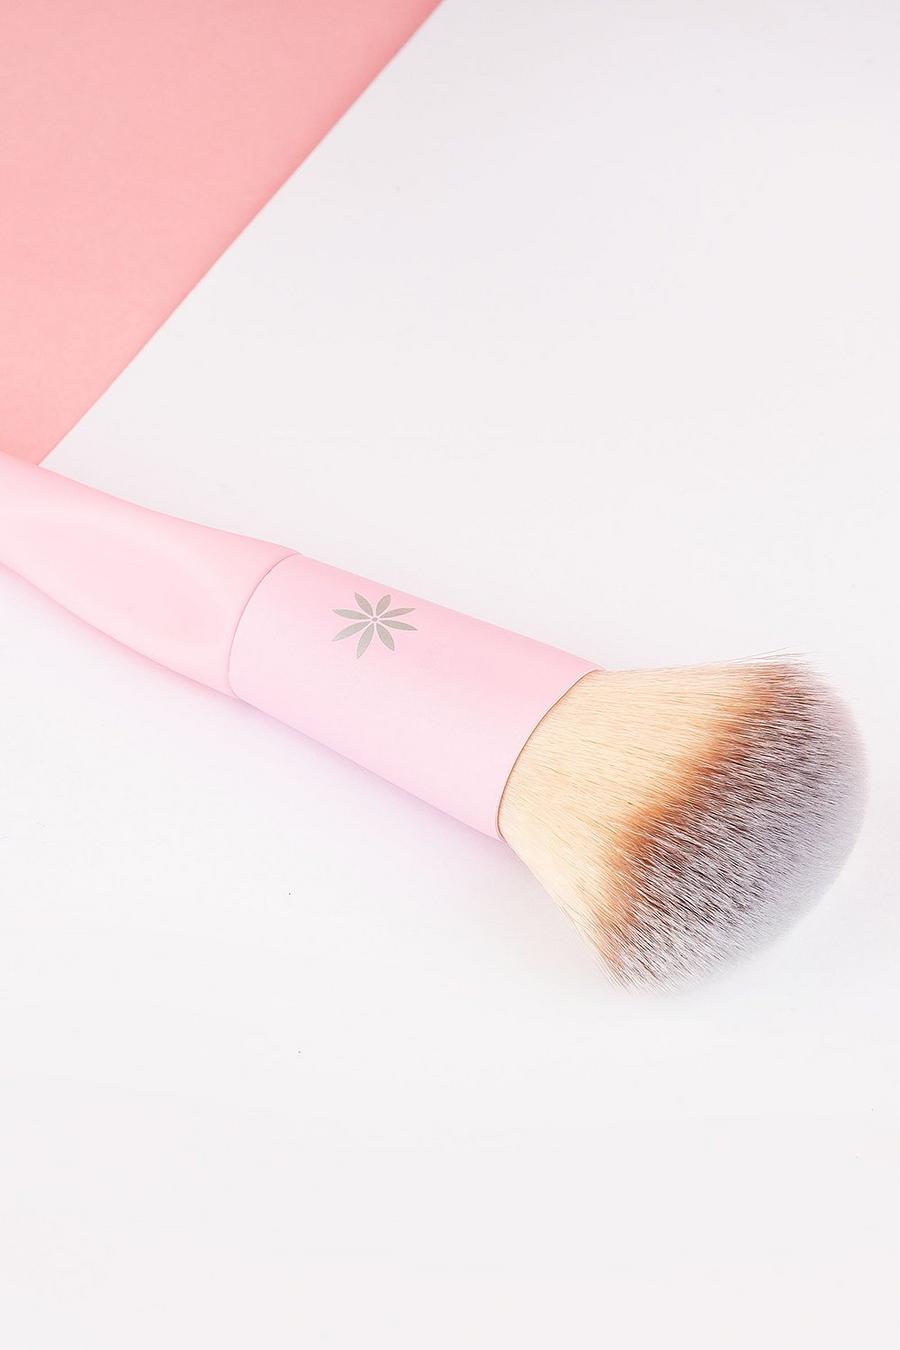 Brushworks - Pinceau à maquillage, Baby pink